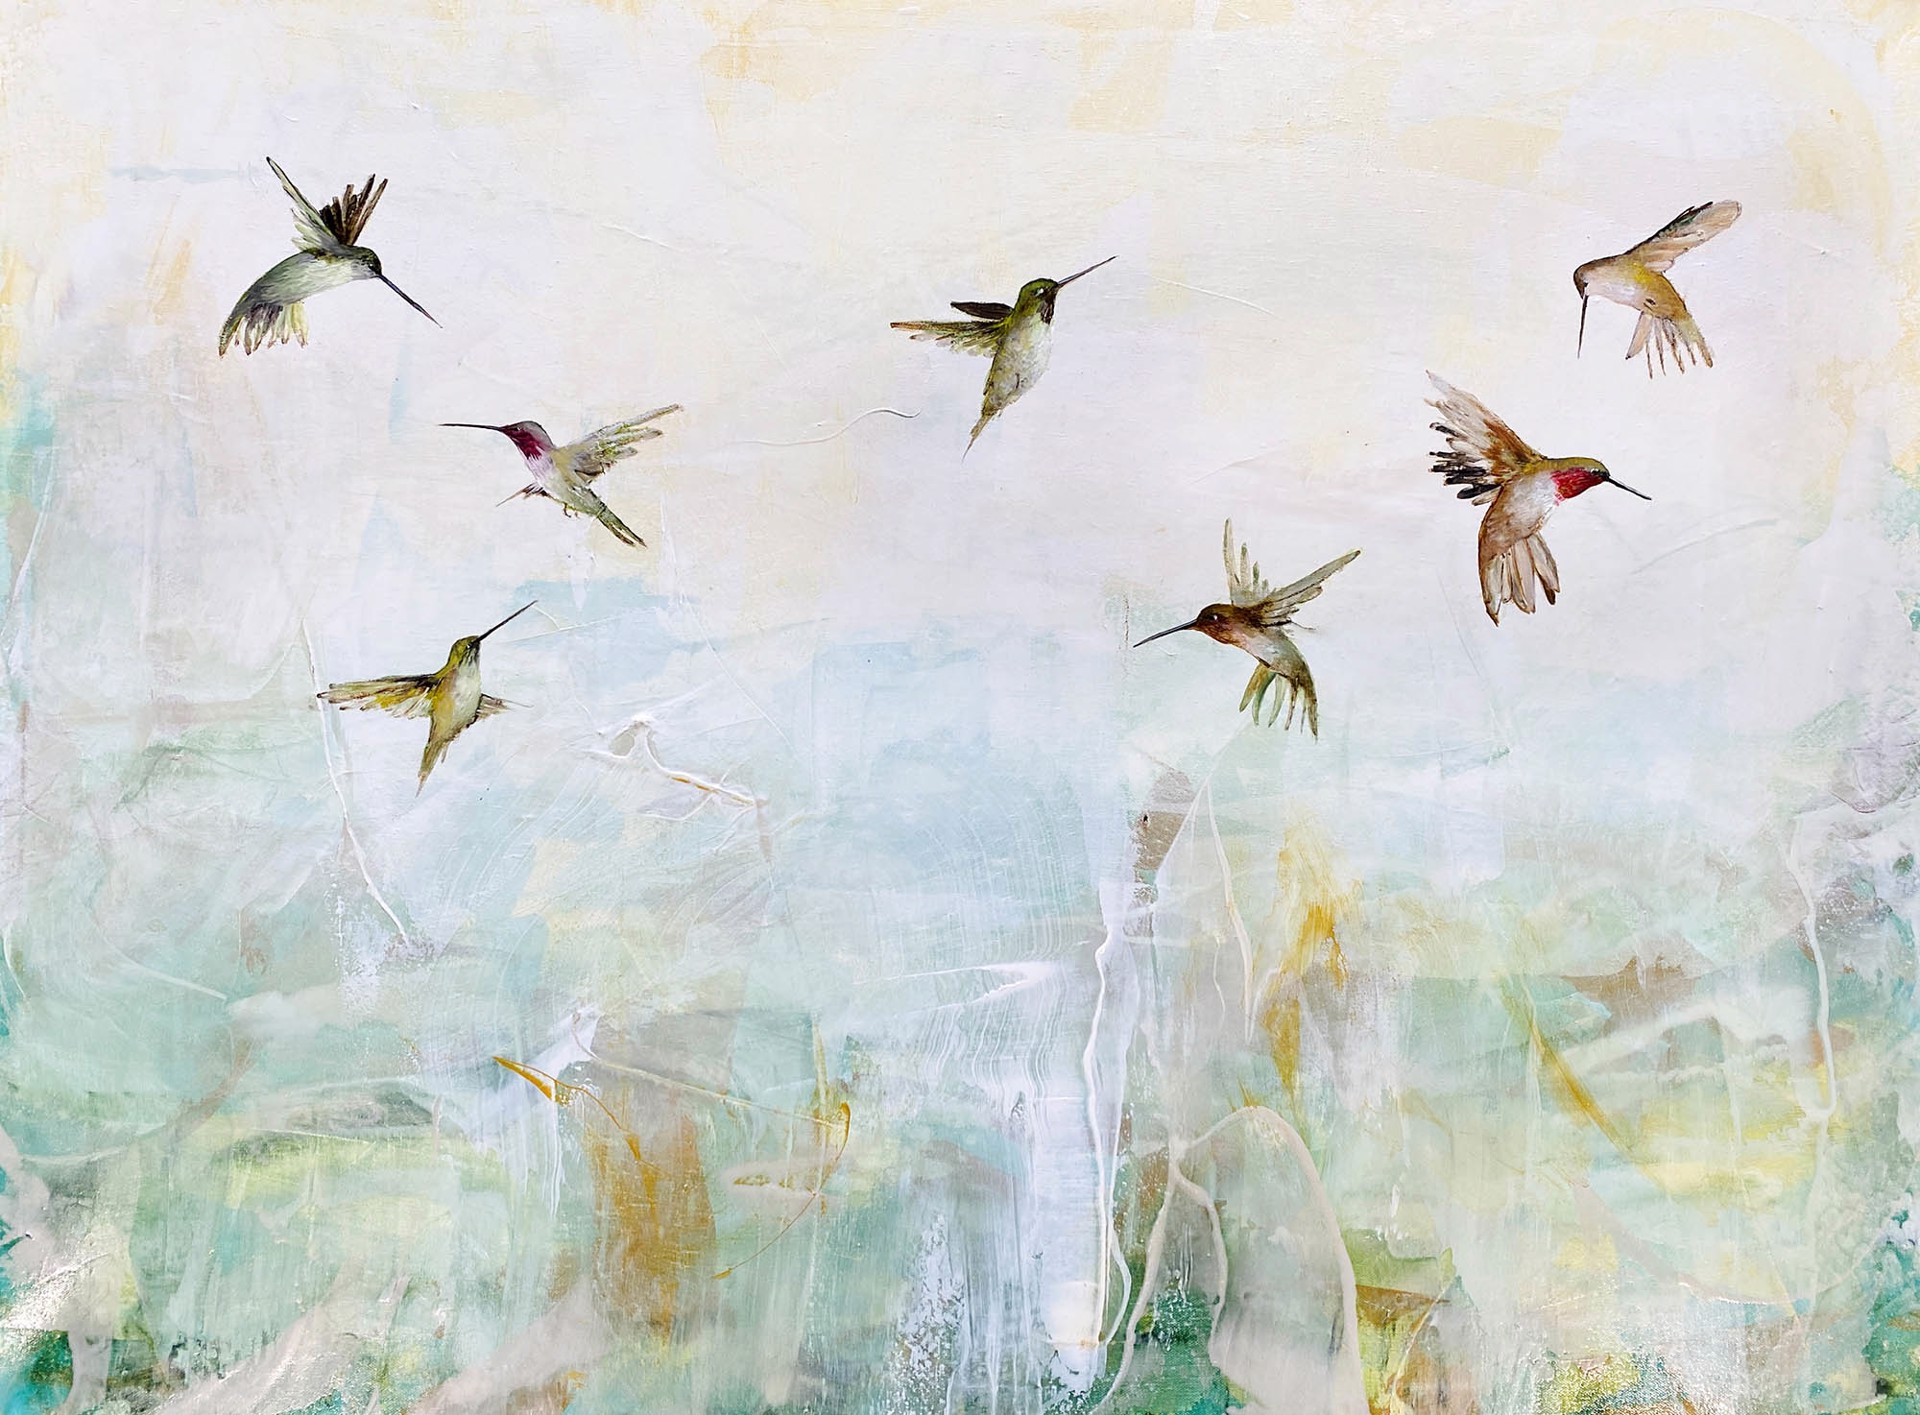 Original Oil Painting Featuring Hummingbirds In Flight Over Abstract Green Background